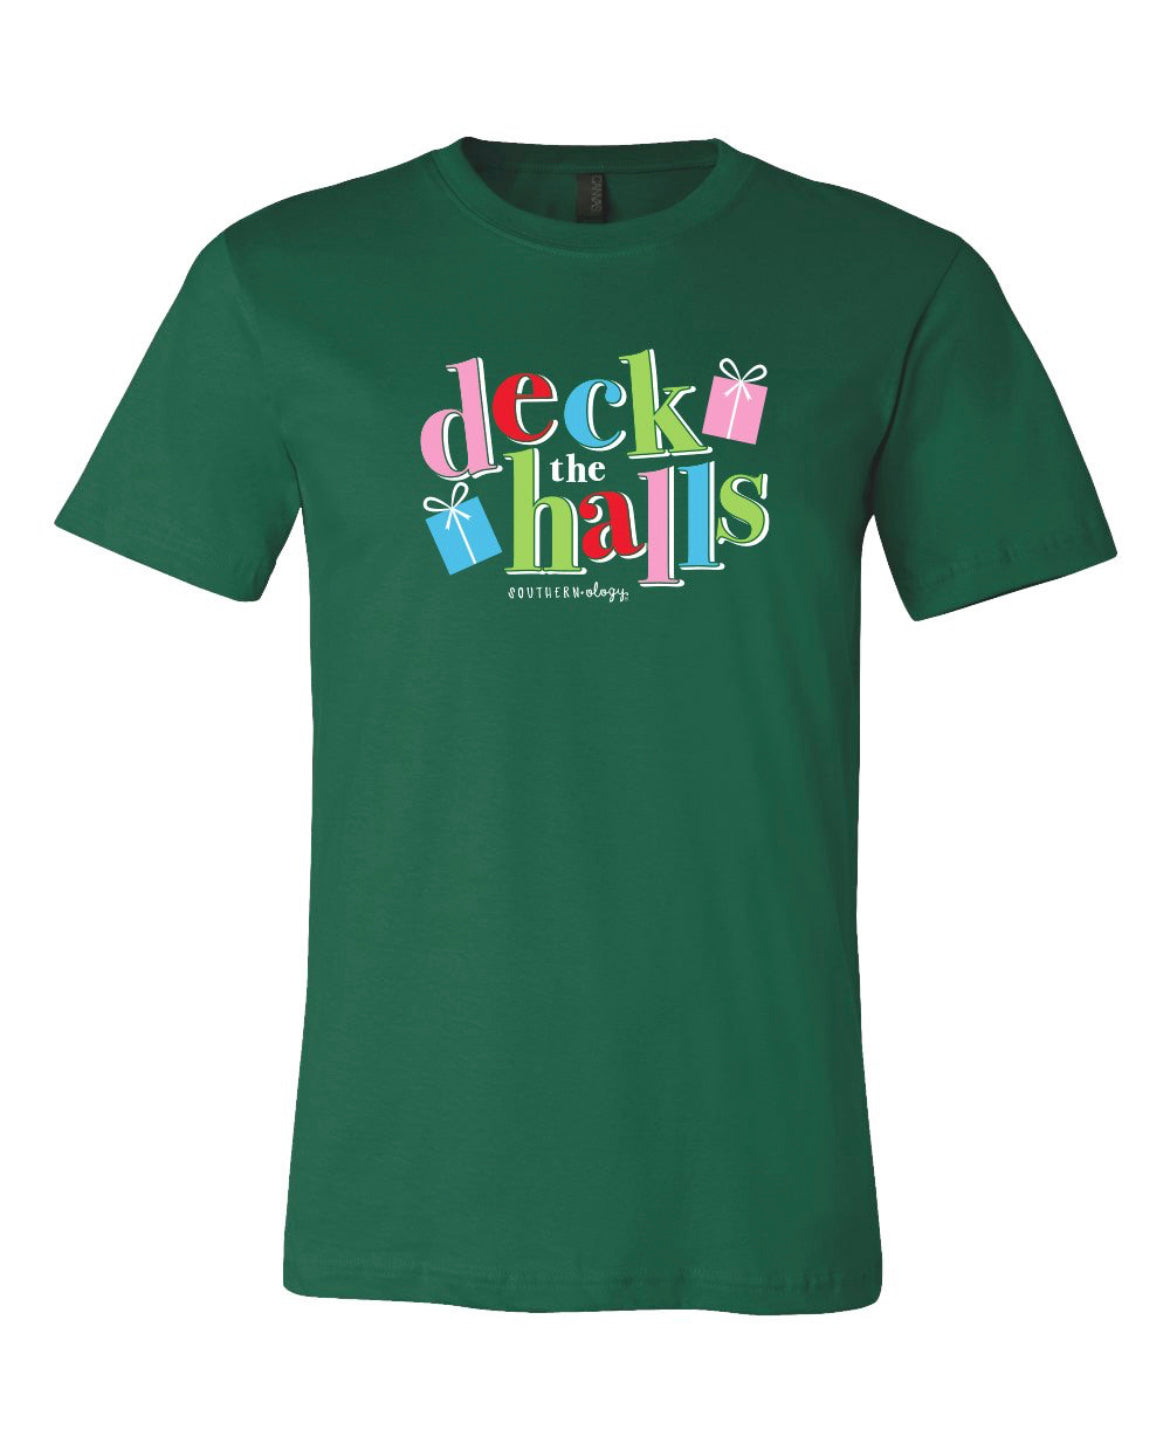 Southernology SS Deck the Halls Statement Tshirt*